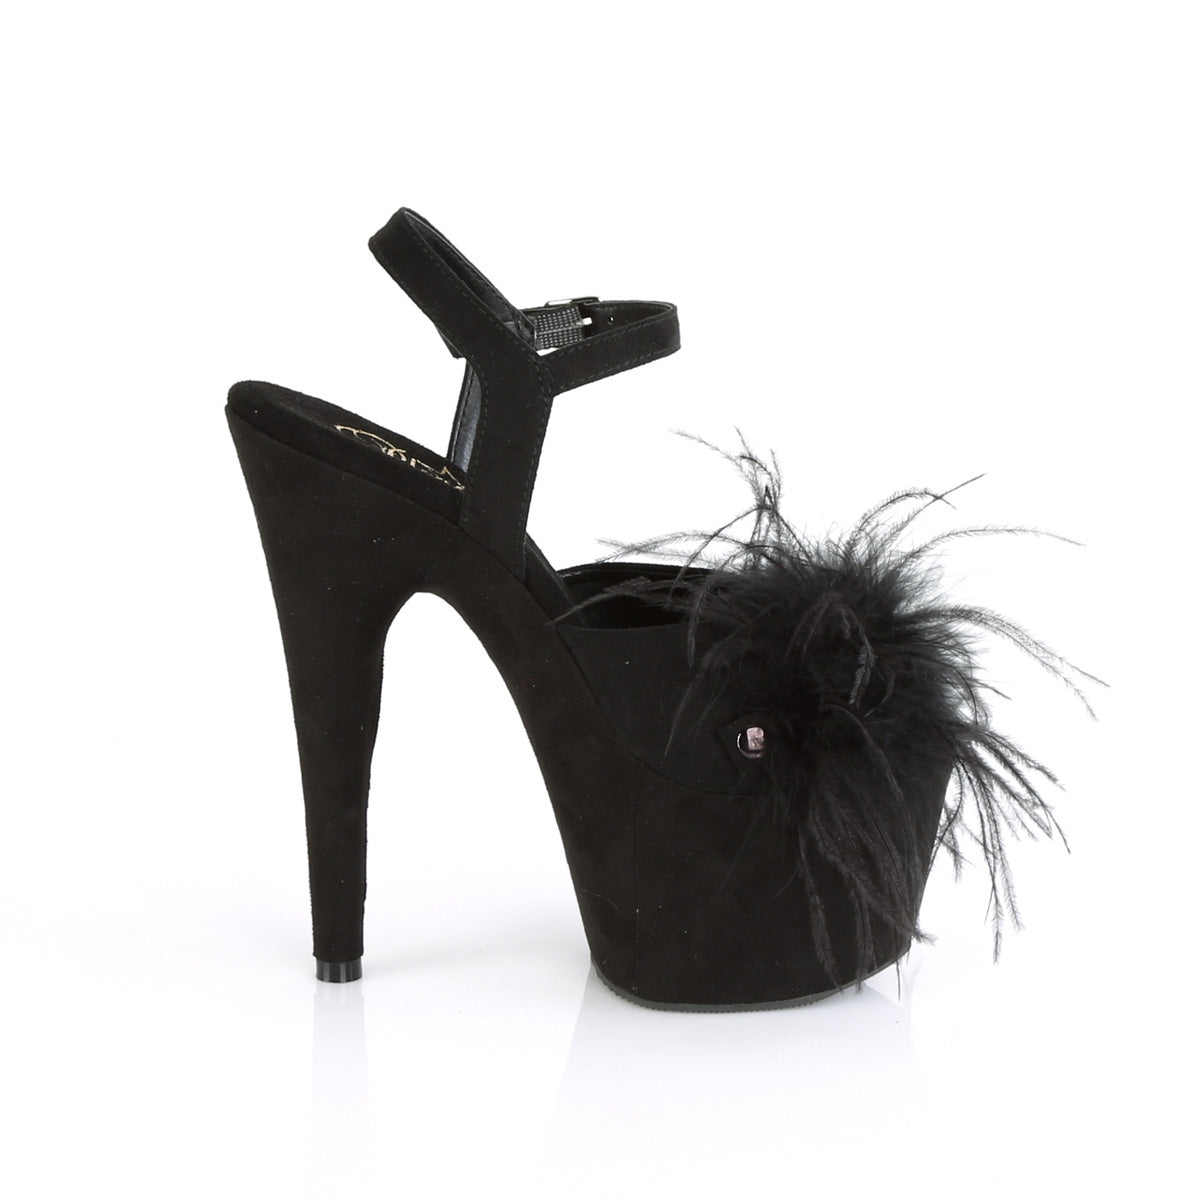 ADORE-709F Pleaser 7 Inch Heel Black Pole Dancing Shoes-Pleaser- Sexy Shoes Fetish Heels